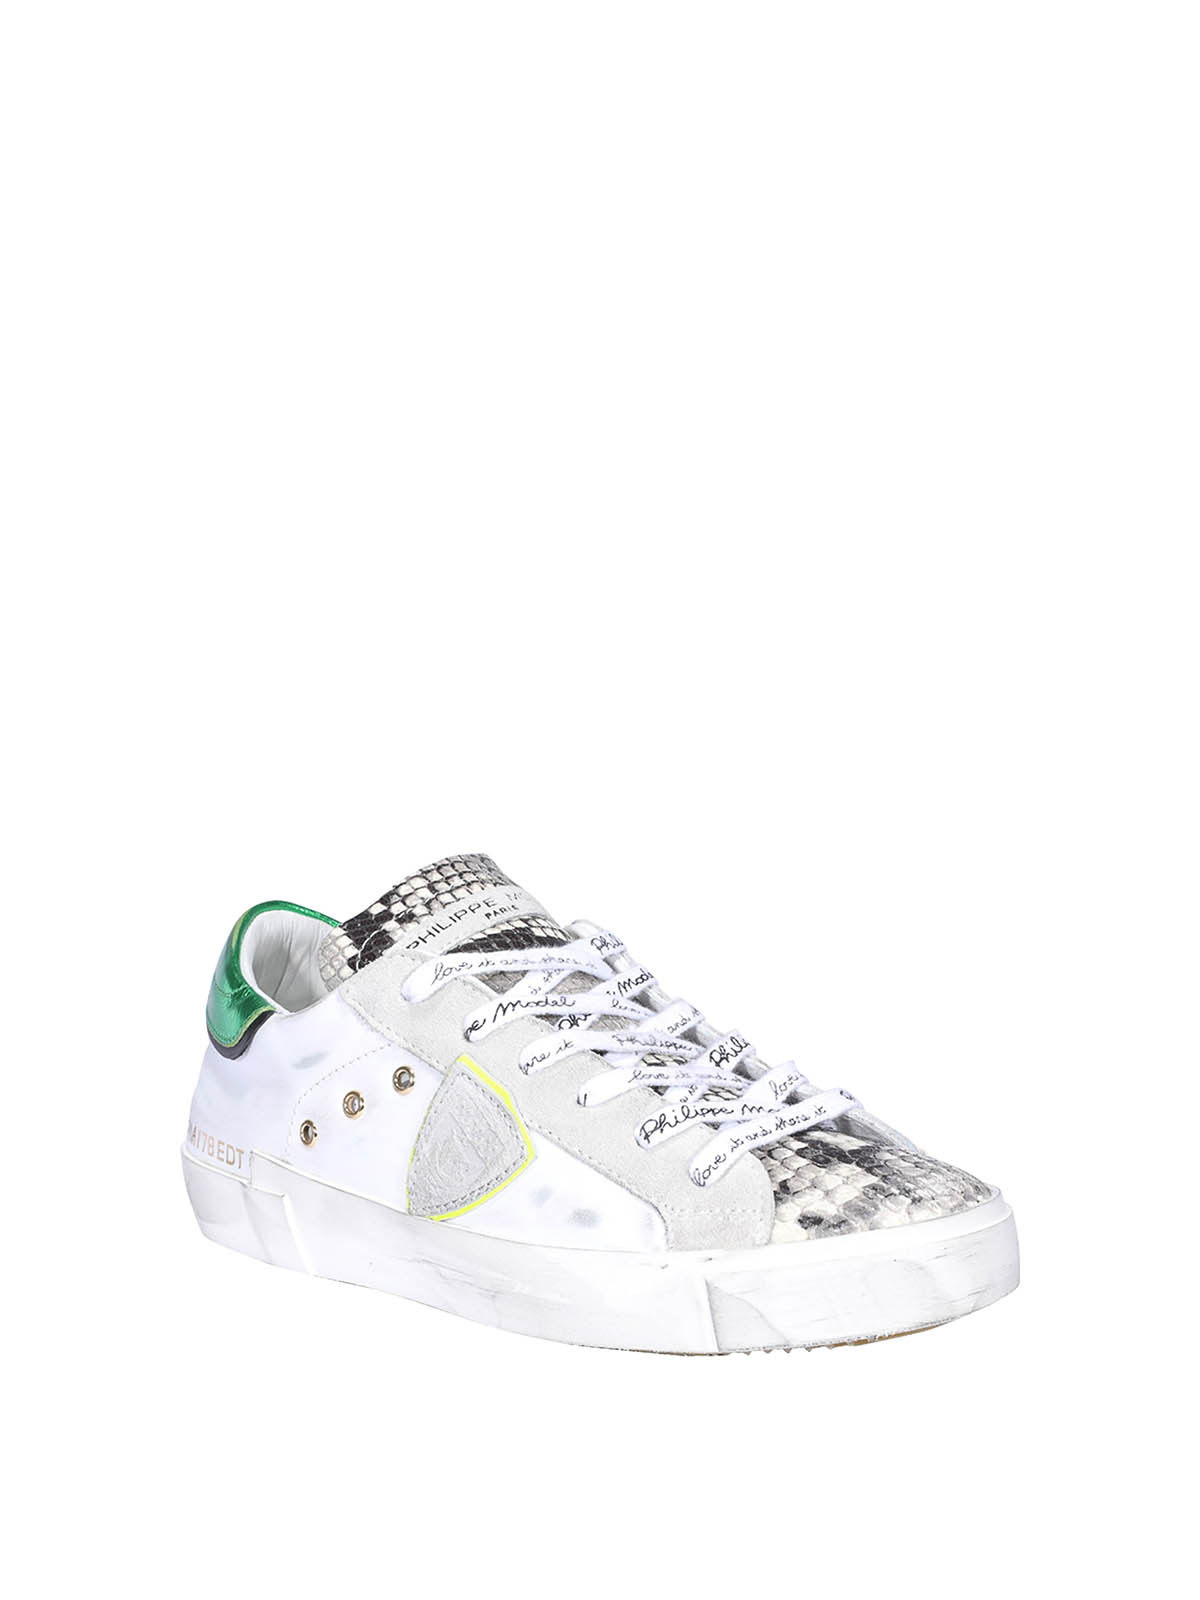 stroom middag Couscous Trainers Philippe Model - Paris X python printed upper sneakers - PRLDVY05